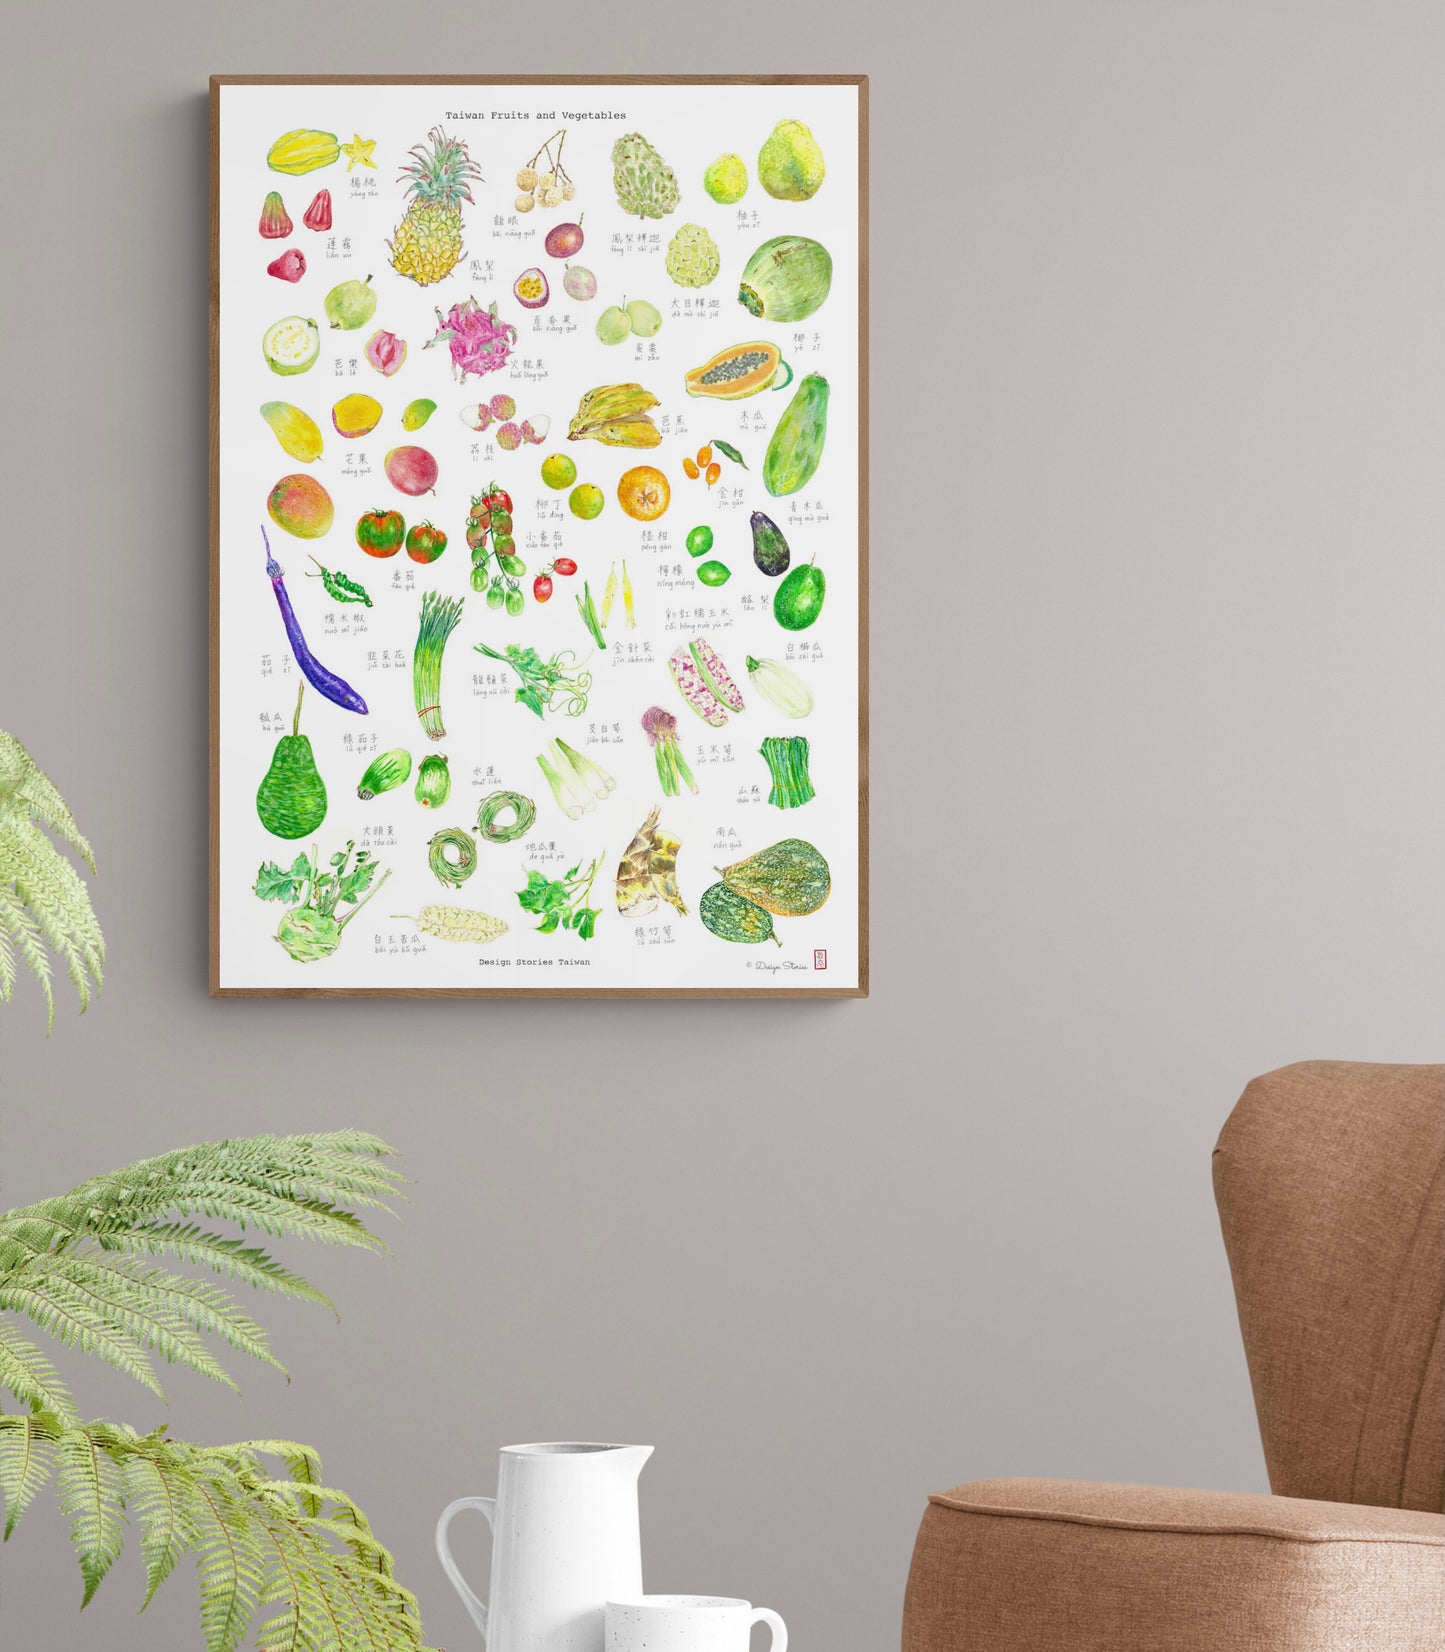 Art Print "Taiwan Fruits and Vegetables" A3size(unframed)